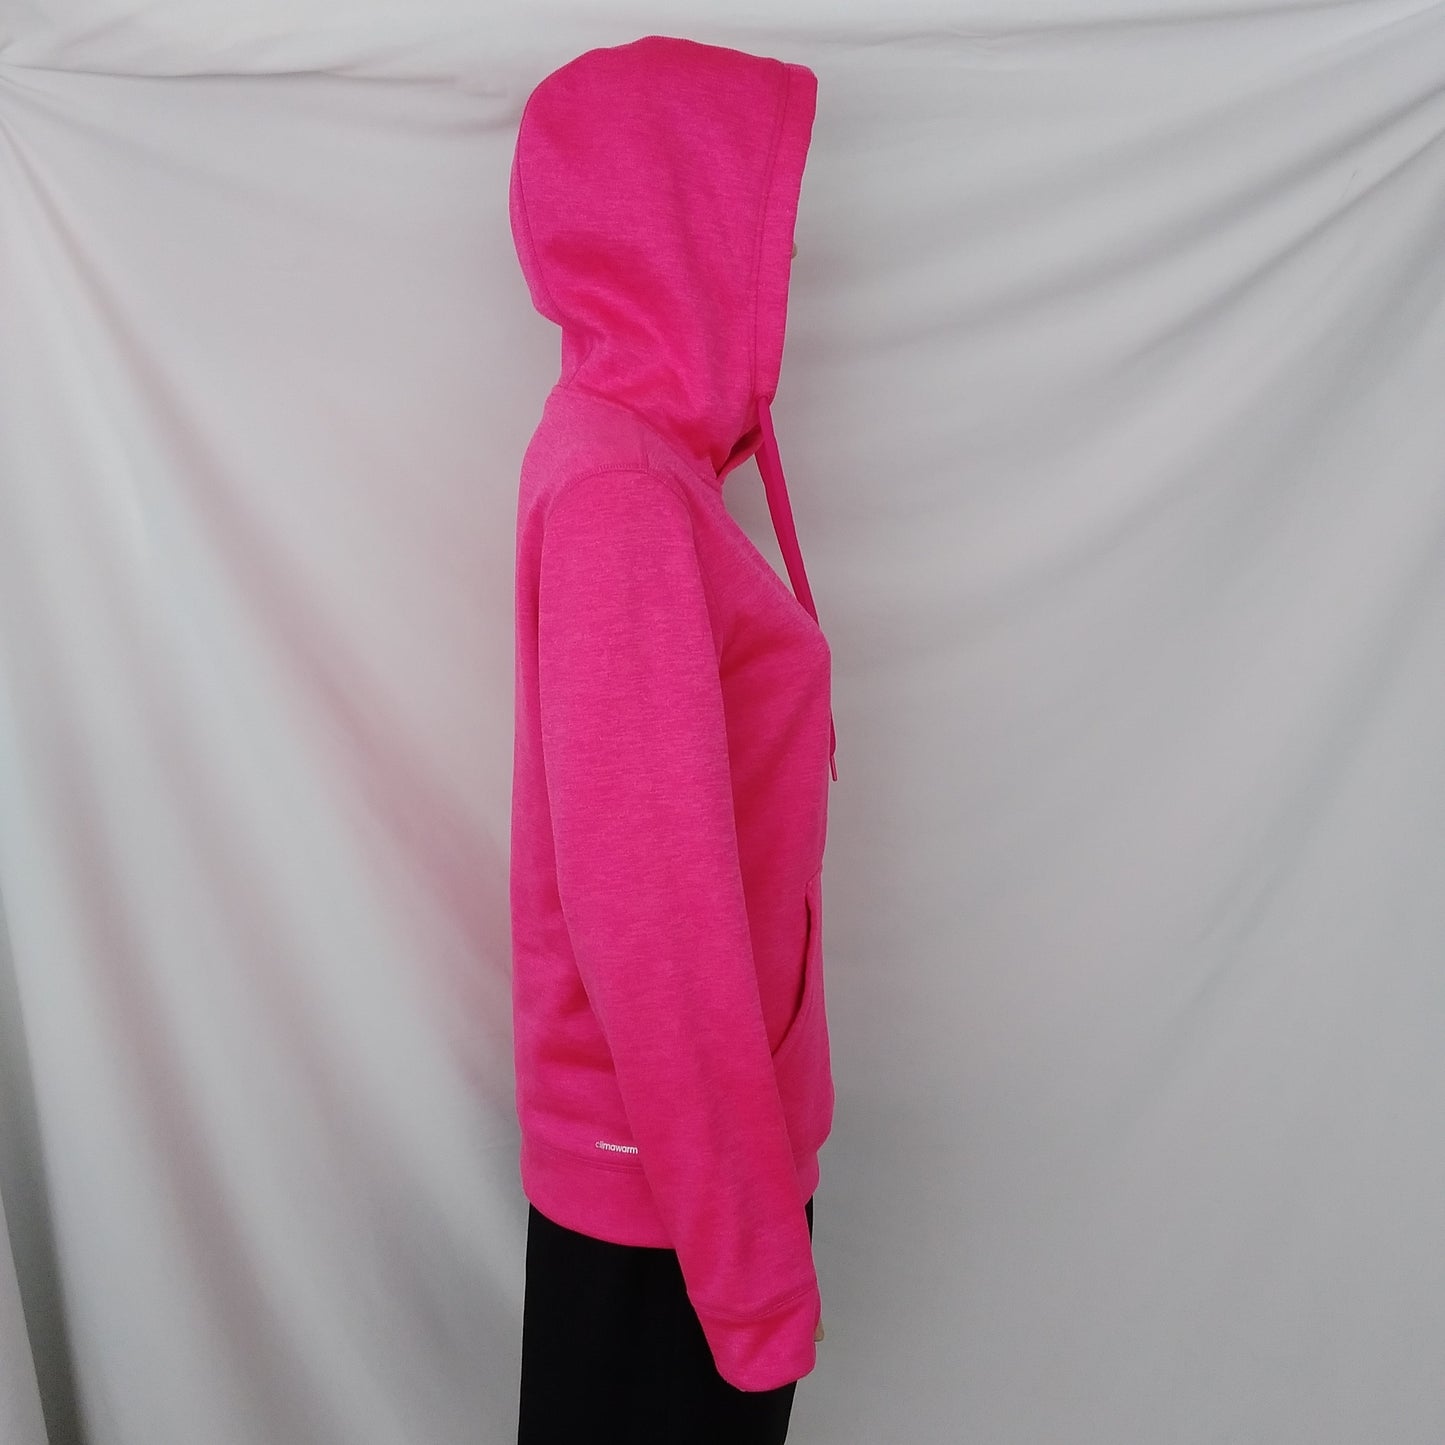 ADIDAS Pink Climawarm Pullover Hoodie - S